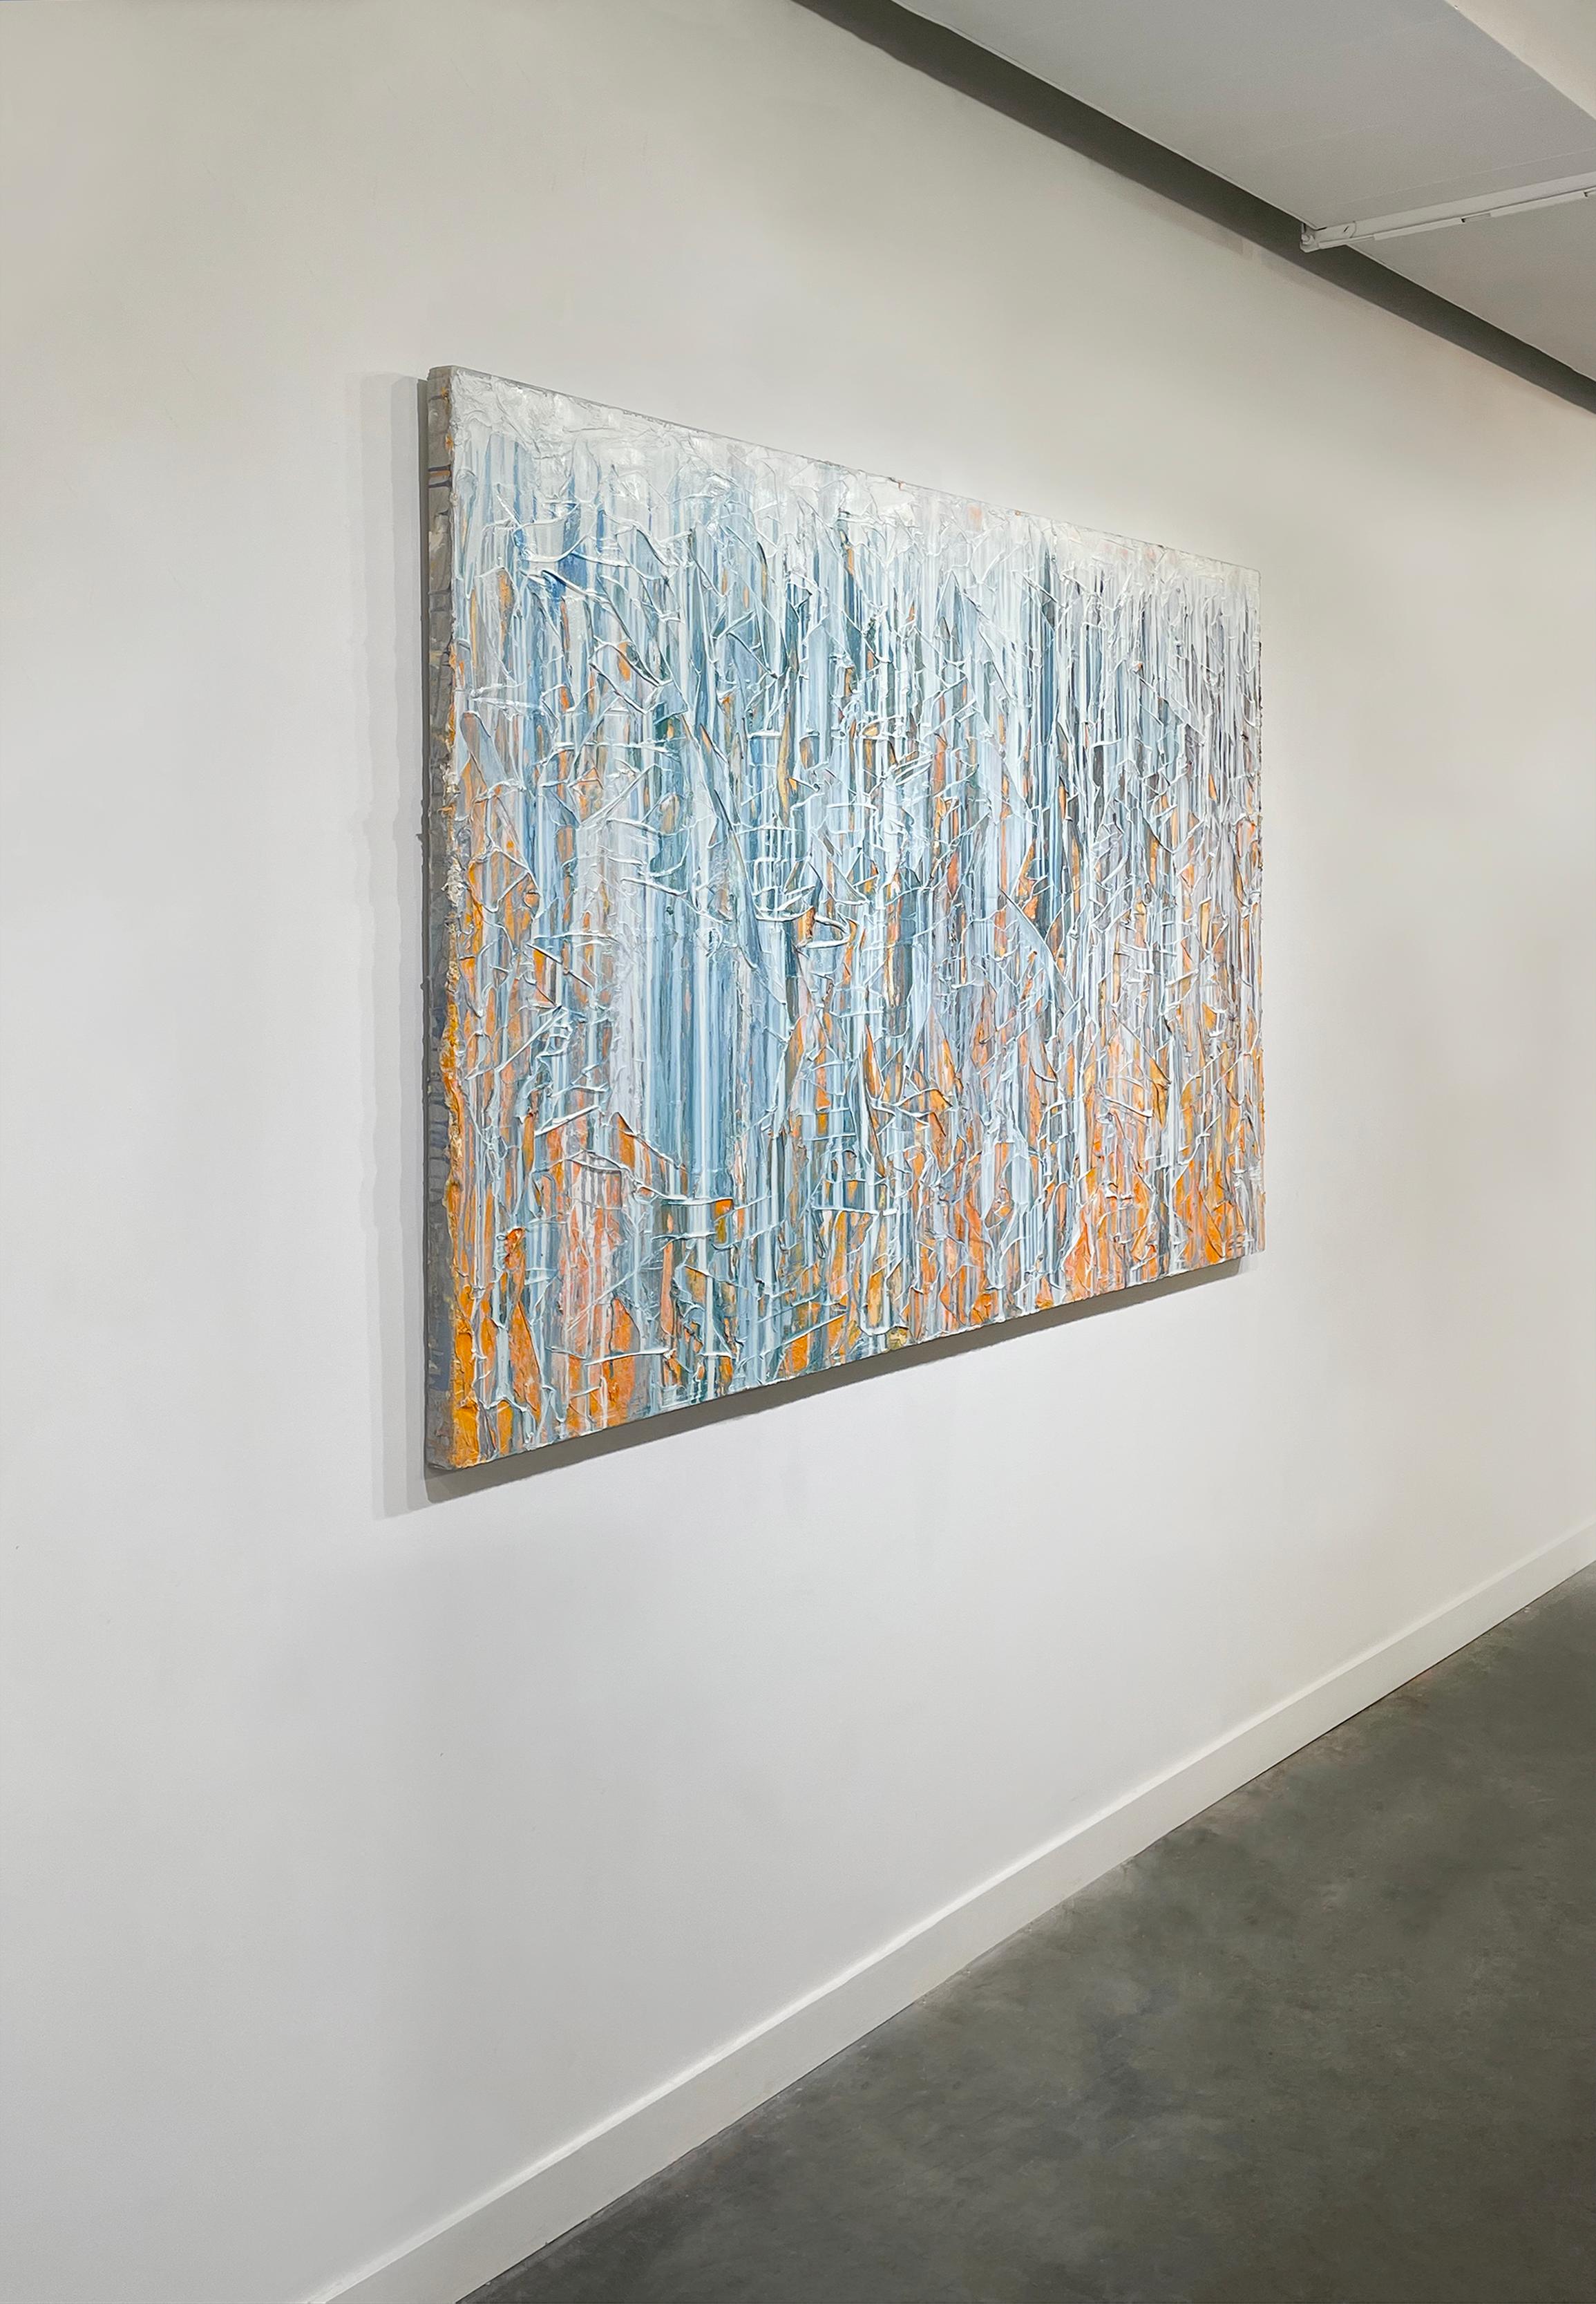 This large-scale, abstract statement painting was created with oil paint on gallery wrapped canvas. Thick drips of white and grey blue paint are dripped down the front of a sculptured palette knifed surface. The textured under layer consists of a